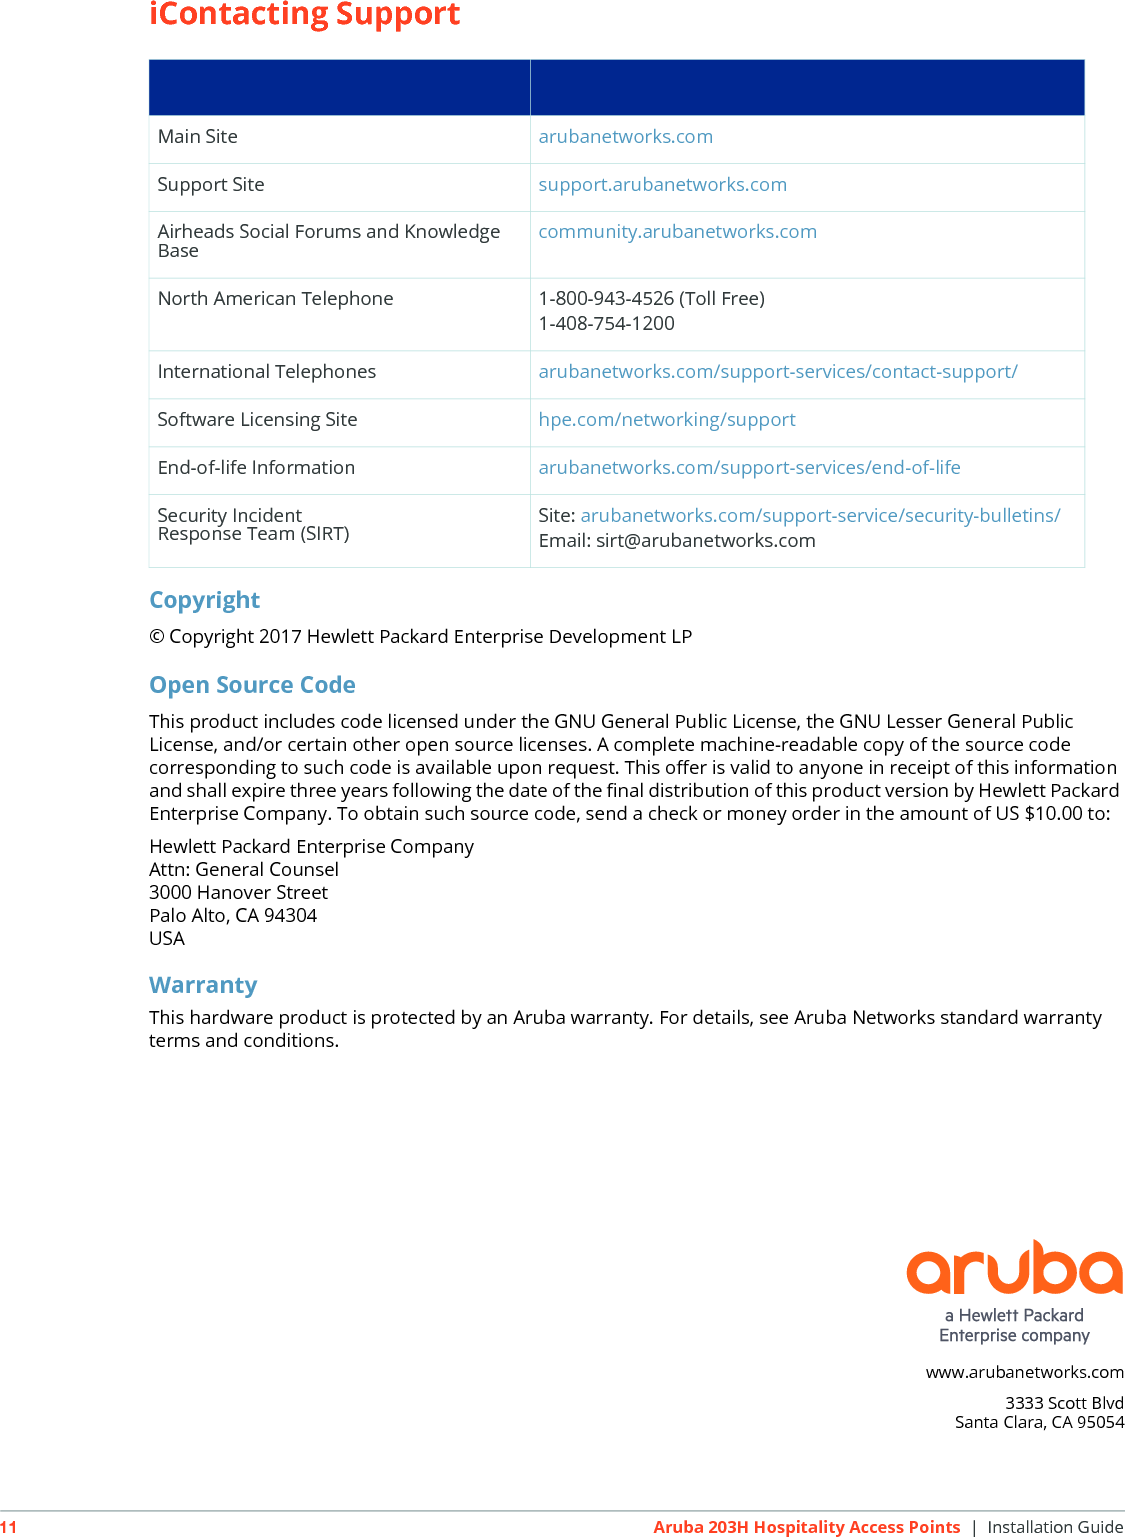 www.arubanetworks.com3333 Scott BlvdSanta Clara, CA 9505411 Aruba 203H Hospitality Access Points | Installation GuideiContacting SupportCopyright© Copyright 2017 Hewlett Packard Enterprise Development LPOpen Source CodeThis product includes code licensed under the GNU General Public License, the GNU Lesser General Public License, and/or certain other open source licenses. A complete machine-readable copy of the source code corresponding to such code is available upon request. This offer is valid to anyone in receipt of this information and shall expire three years following the date of the final distribution of this product version by Hewlett Packard Enterprise Company. To obtain such source code, send a check or money order in the amount of US $10.00 to:Hewlett Packard Enterprise CompanyAttn: General Counsel3000 Hanover StreetPalo Alto, CA 94304USAWarrantyThis hardware product is protected by an Aruba warranty. For details, see Aruba Networks standard warranty terms and conditions.Main Site arubanetworks.comSupport Site support.arubanetworks.comAirheads Social Forums and Knowledge Base community.arubanetworks.comNorth American Telephone 1-800-943-4526 (Toll Free)1-408-754-1200International Telephones arubanetworks.com/support-services/contact-support/Software Licensing Site hpe.com/networking/supportEnd-of-life Information arubanetworks.com/support-services/end-of-lifeSecurity IncidentResponse Team (SIRT) Site: arubanetworks.com/support-service/security-bulletins/Email: sirt@arubanetworks.com